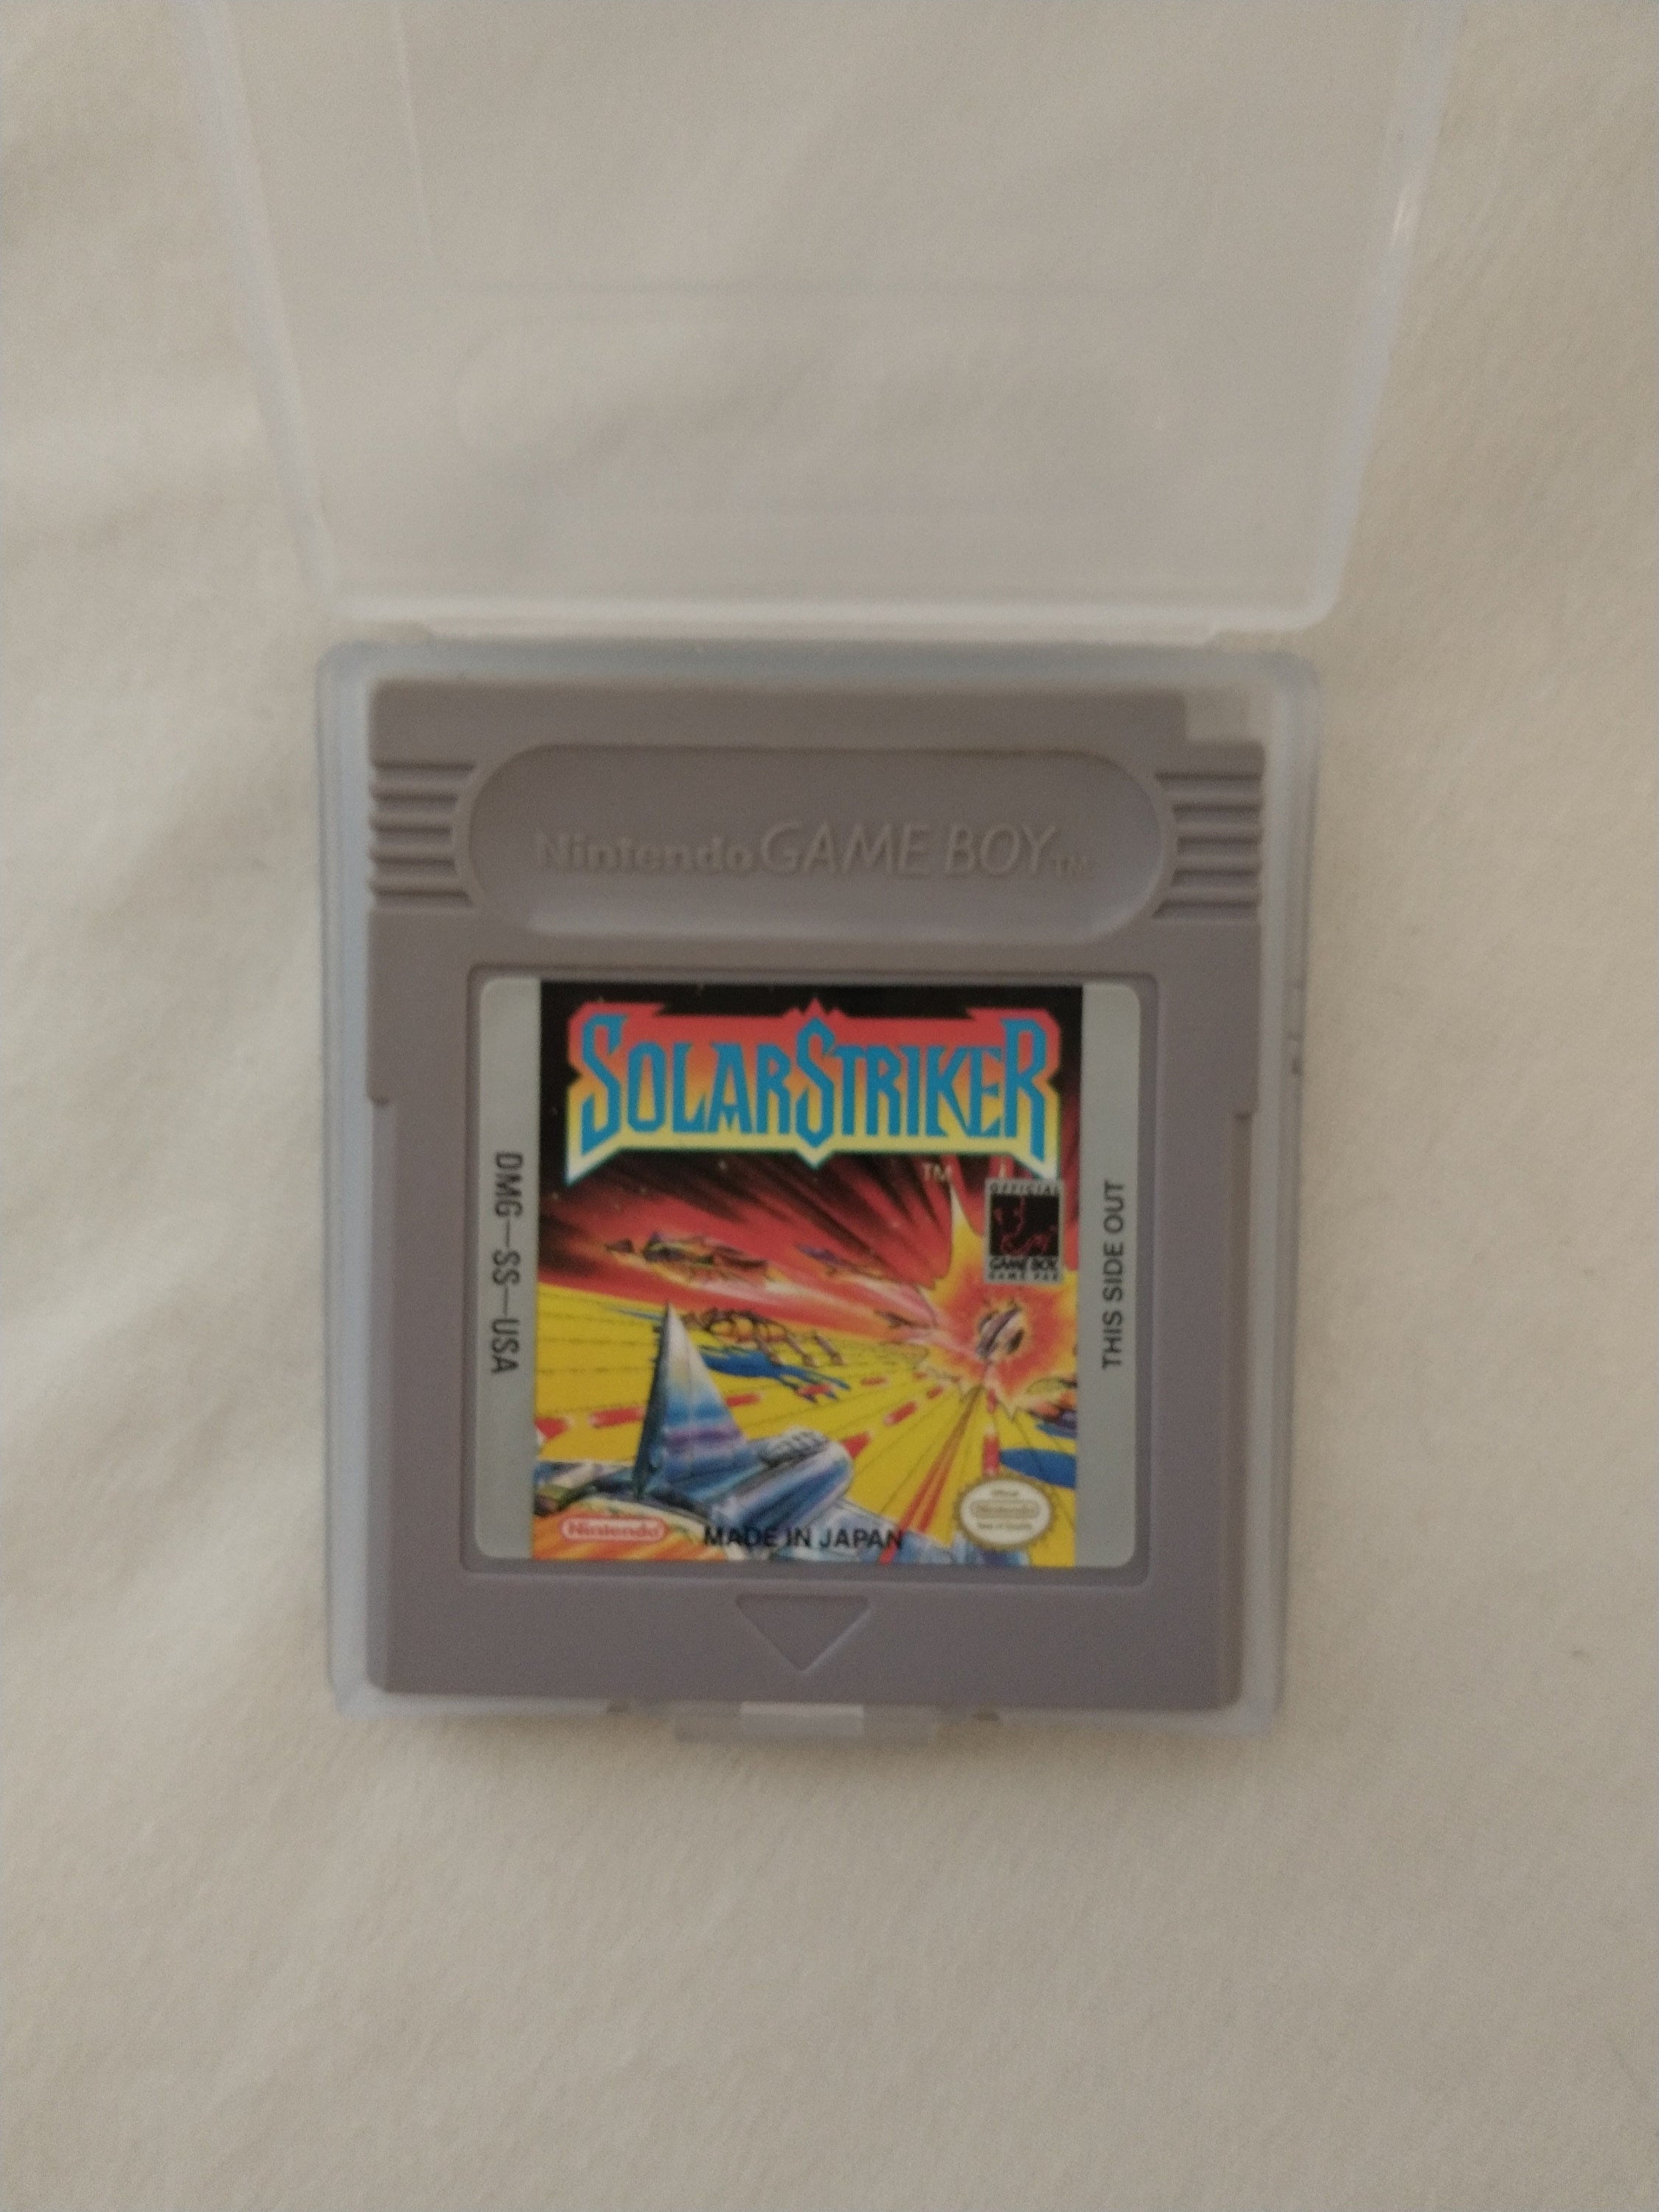 Speedy Gonzales Game Boy with Box and Manual [Gameboy Japanese version]